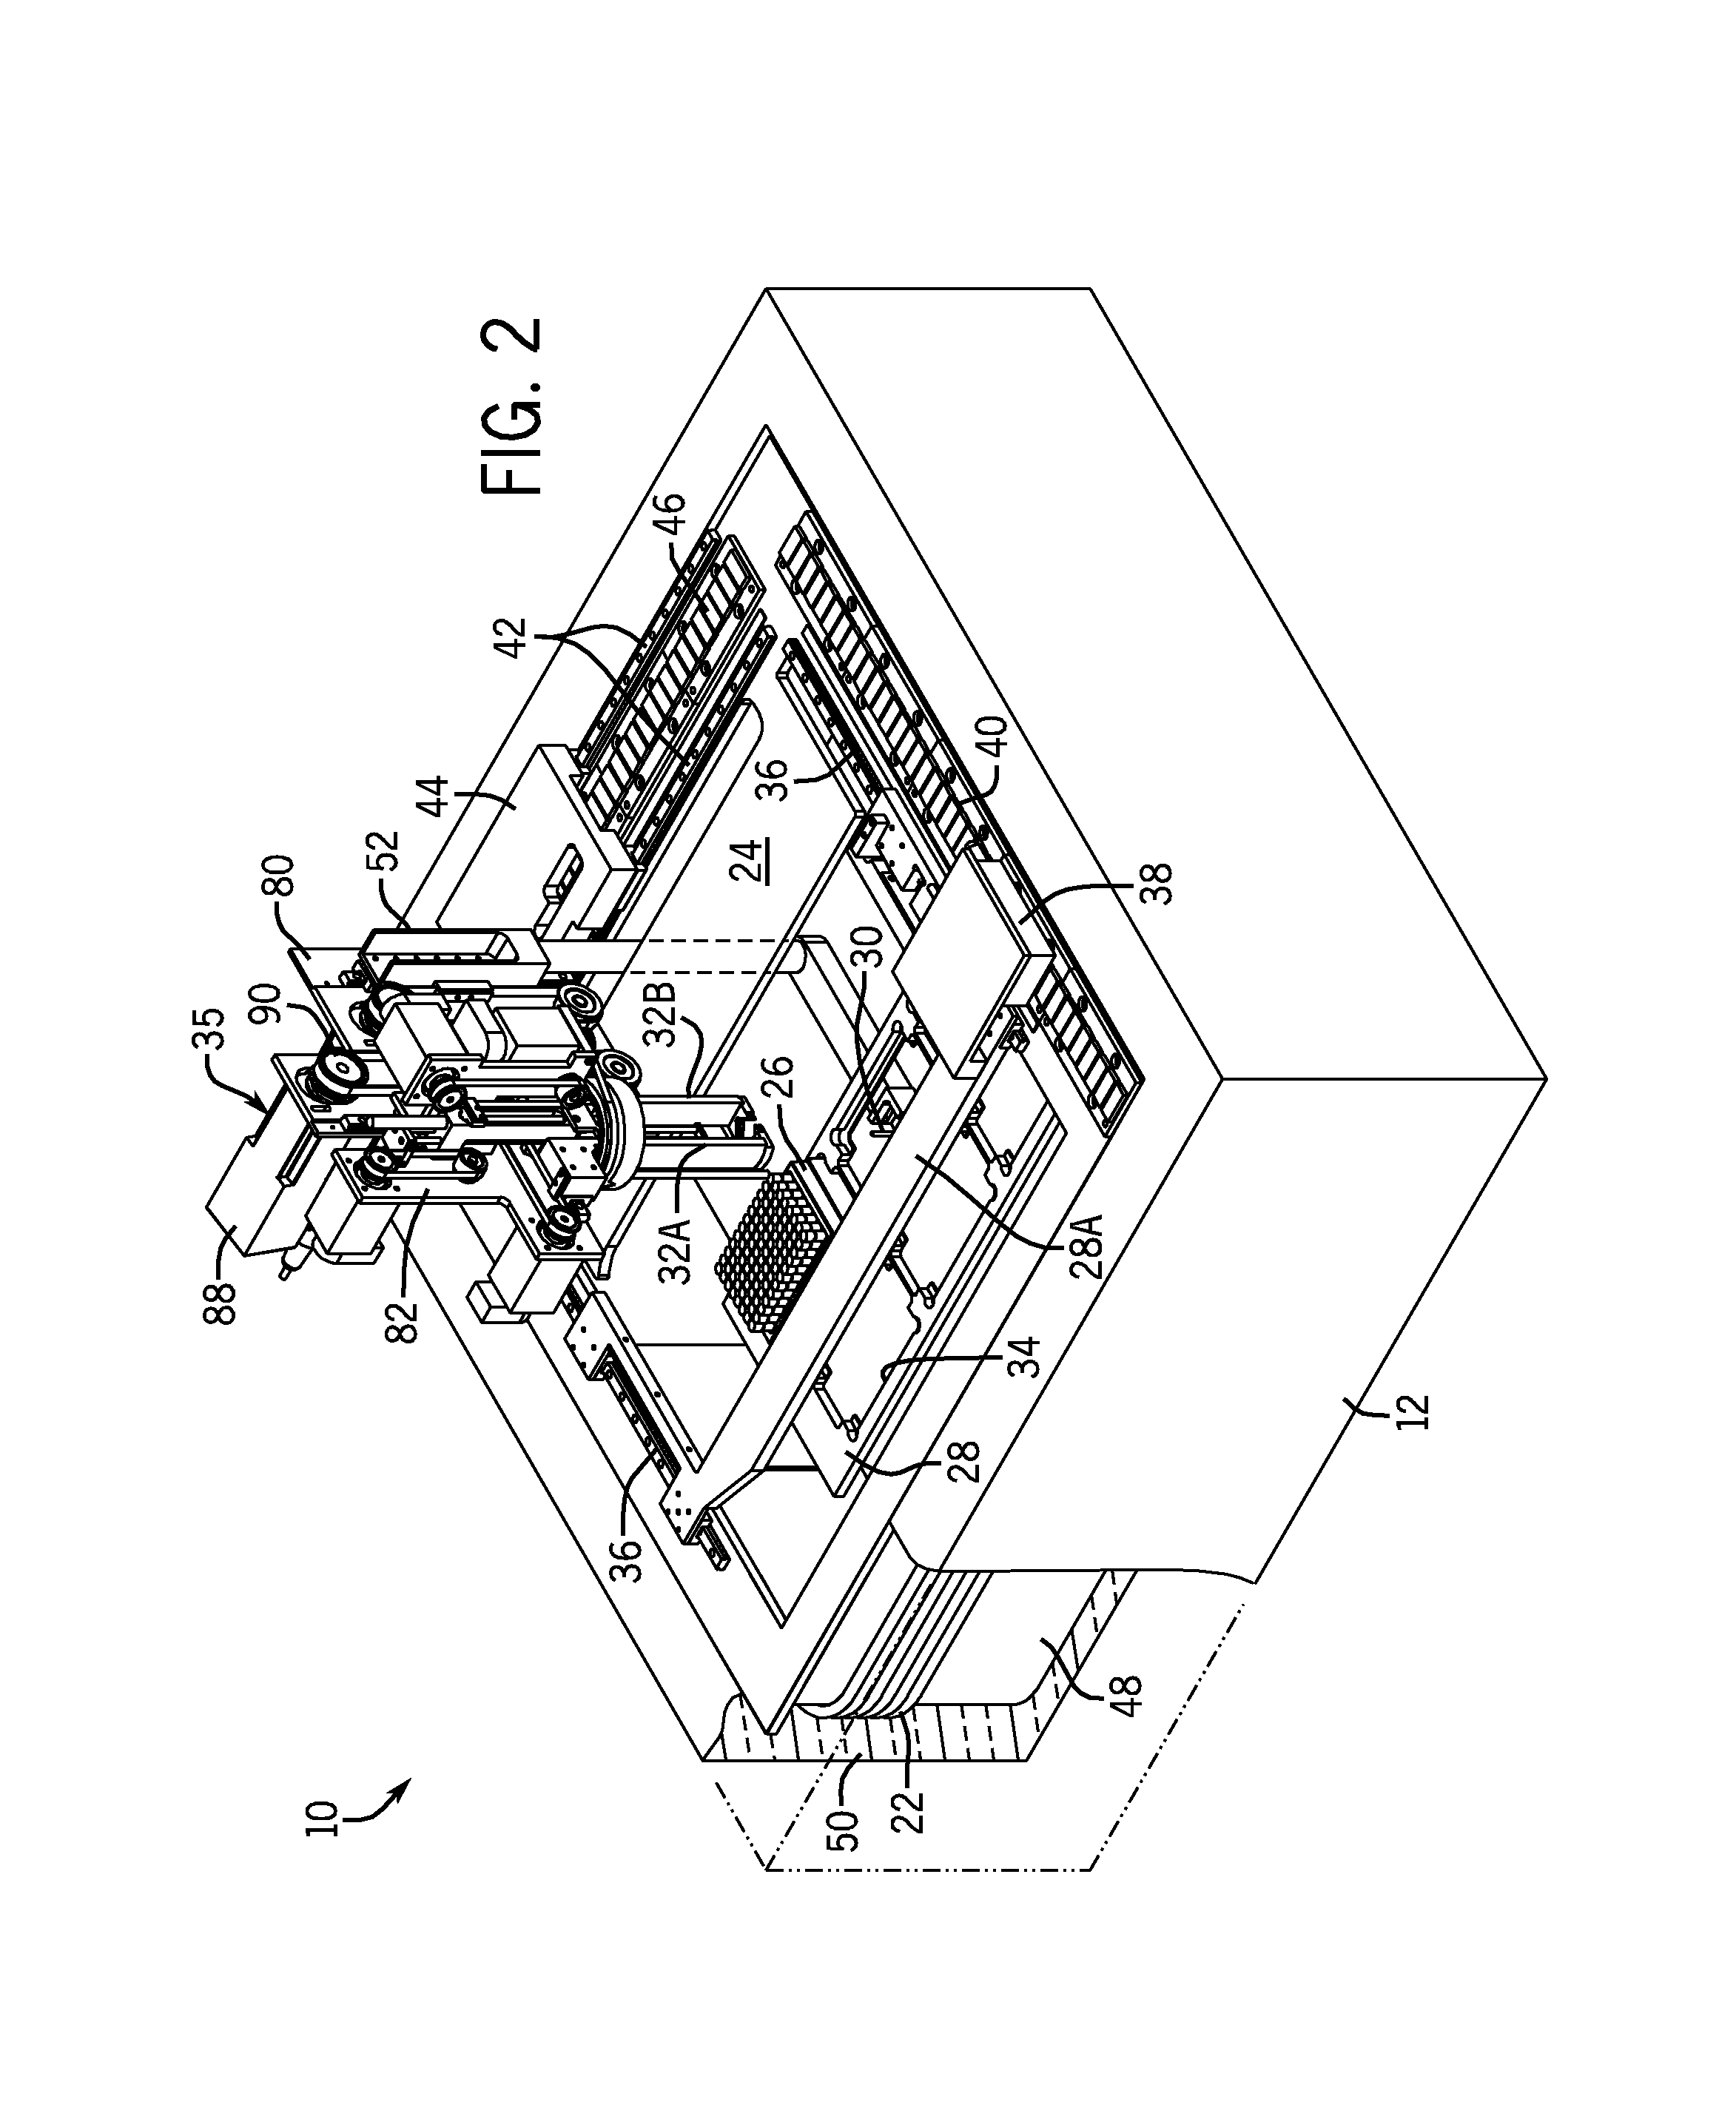 Tube picking mechanisms with an ultra-low temperature or cryogenic picking compartment